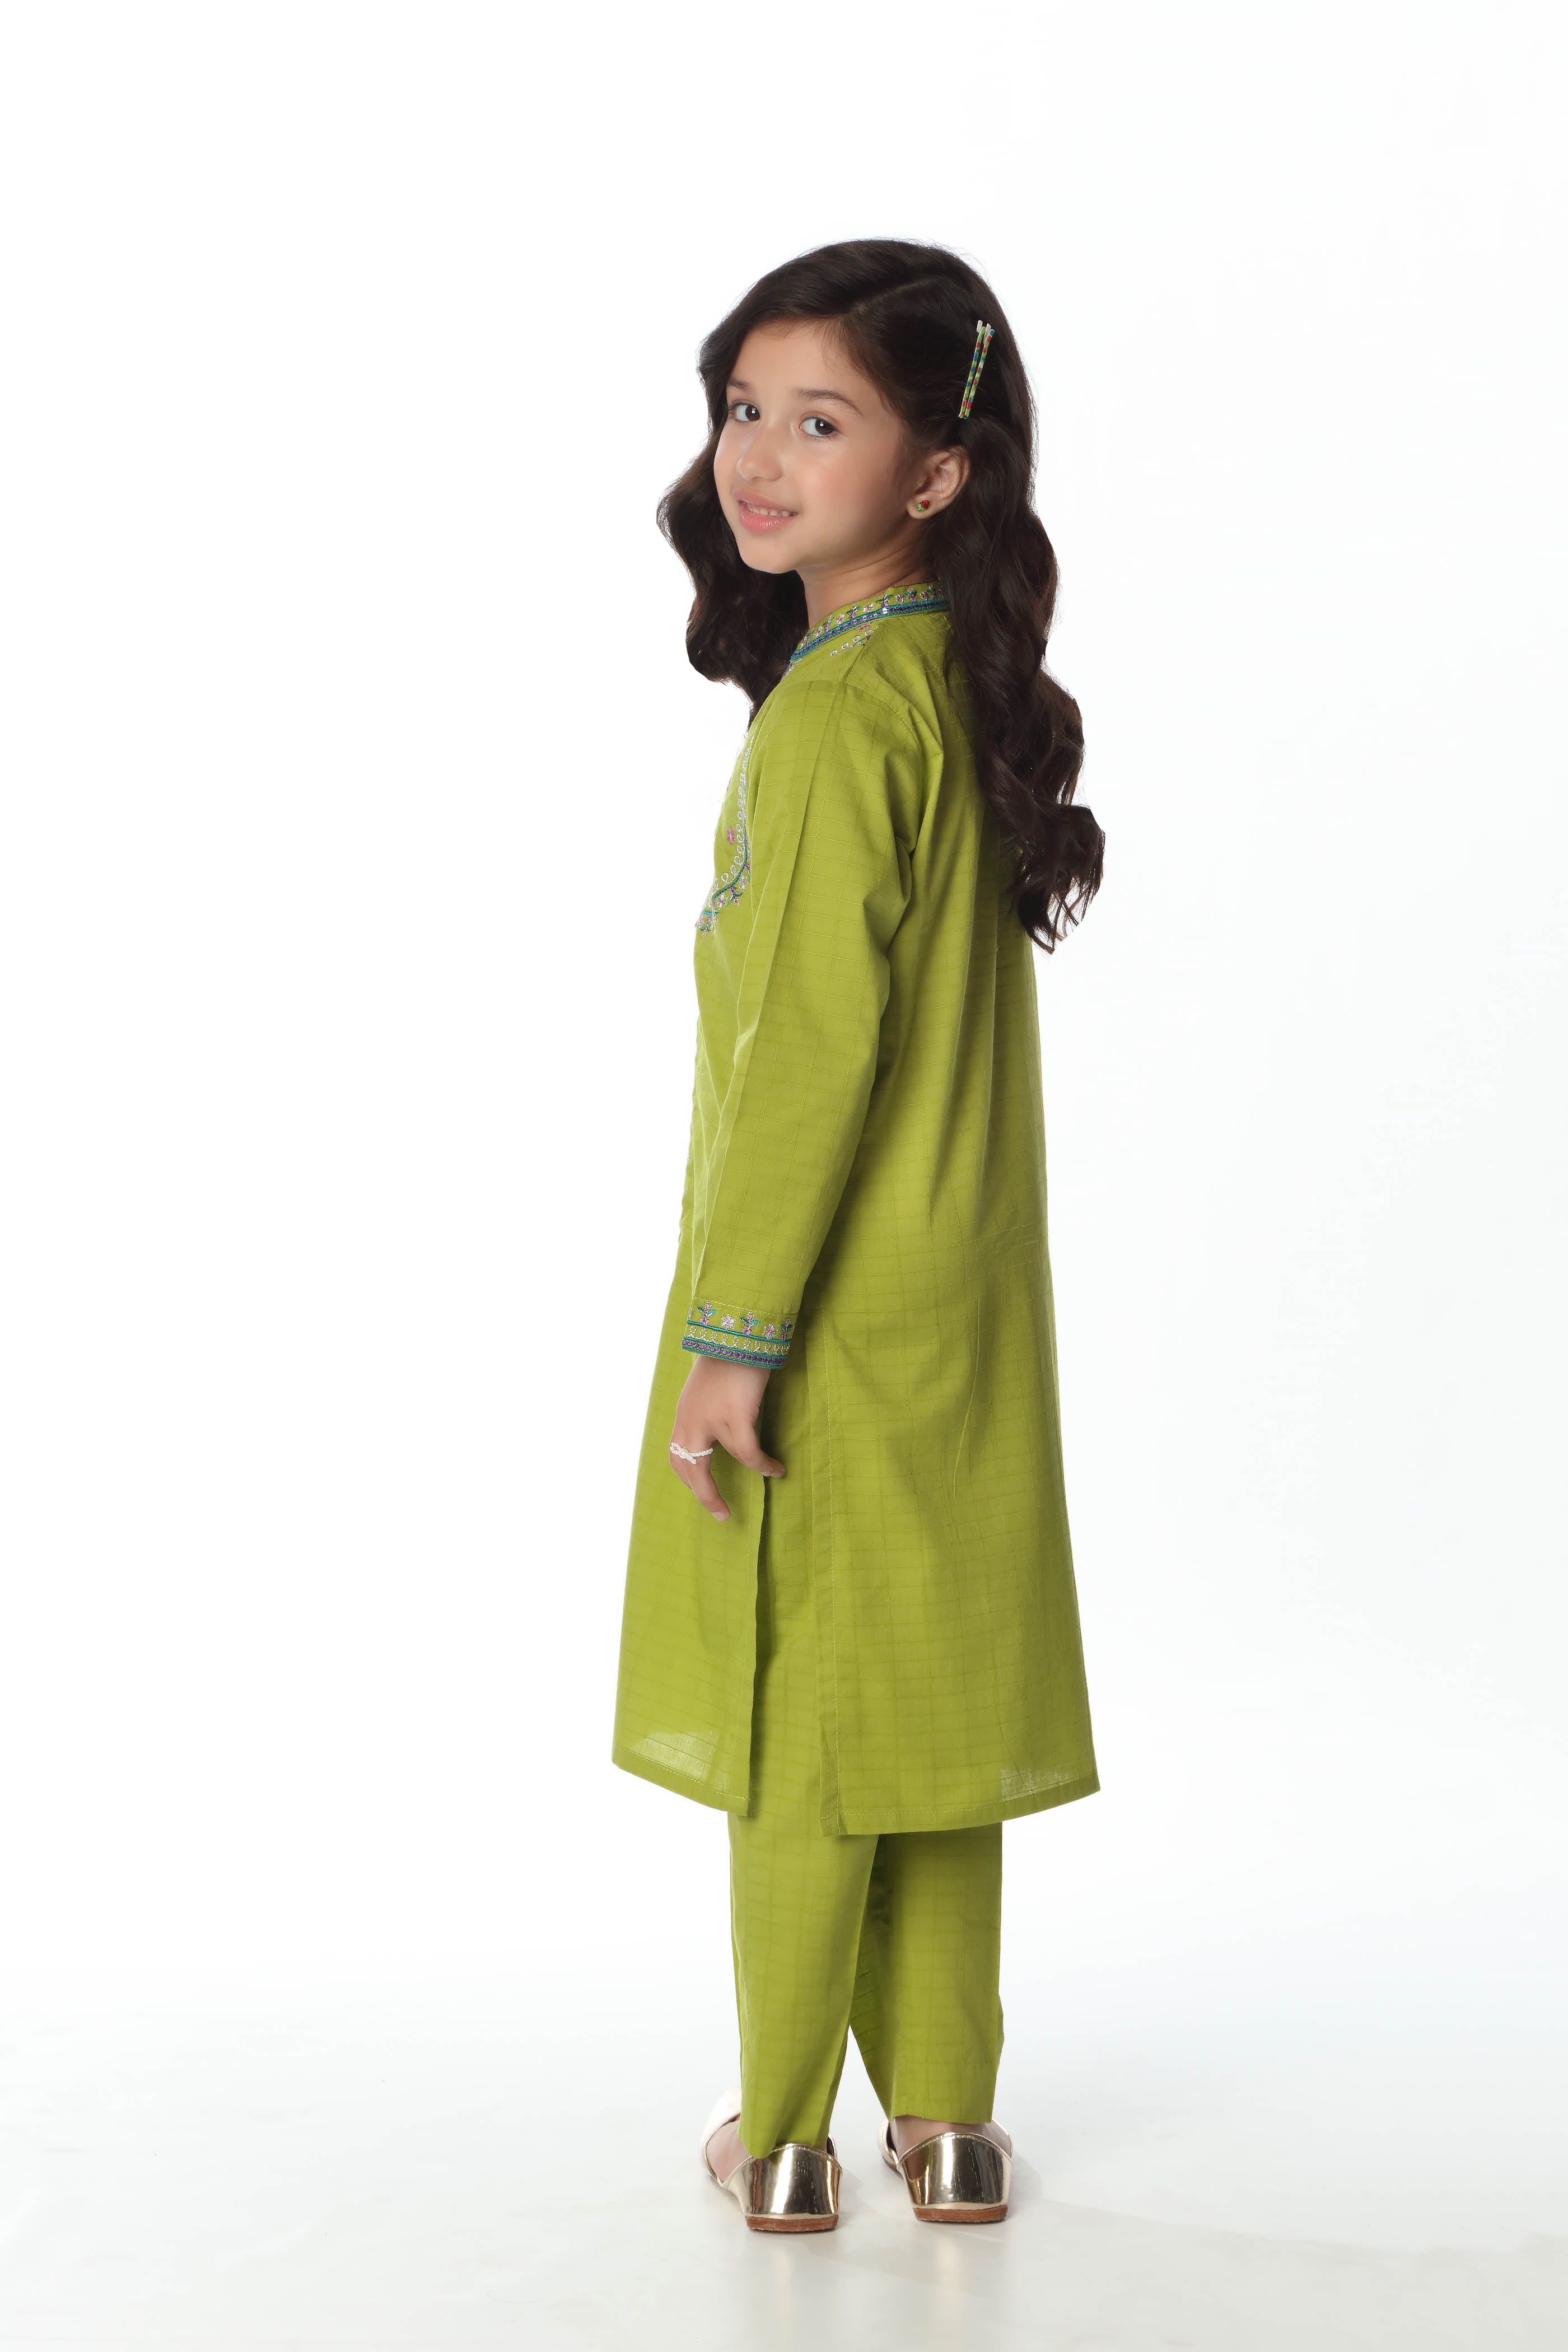 Embroidered Kameez Trousers (GSK-509)